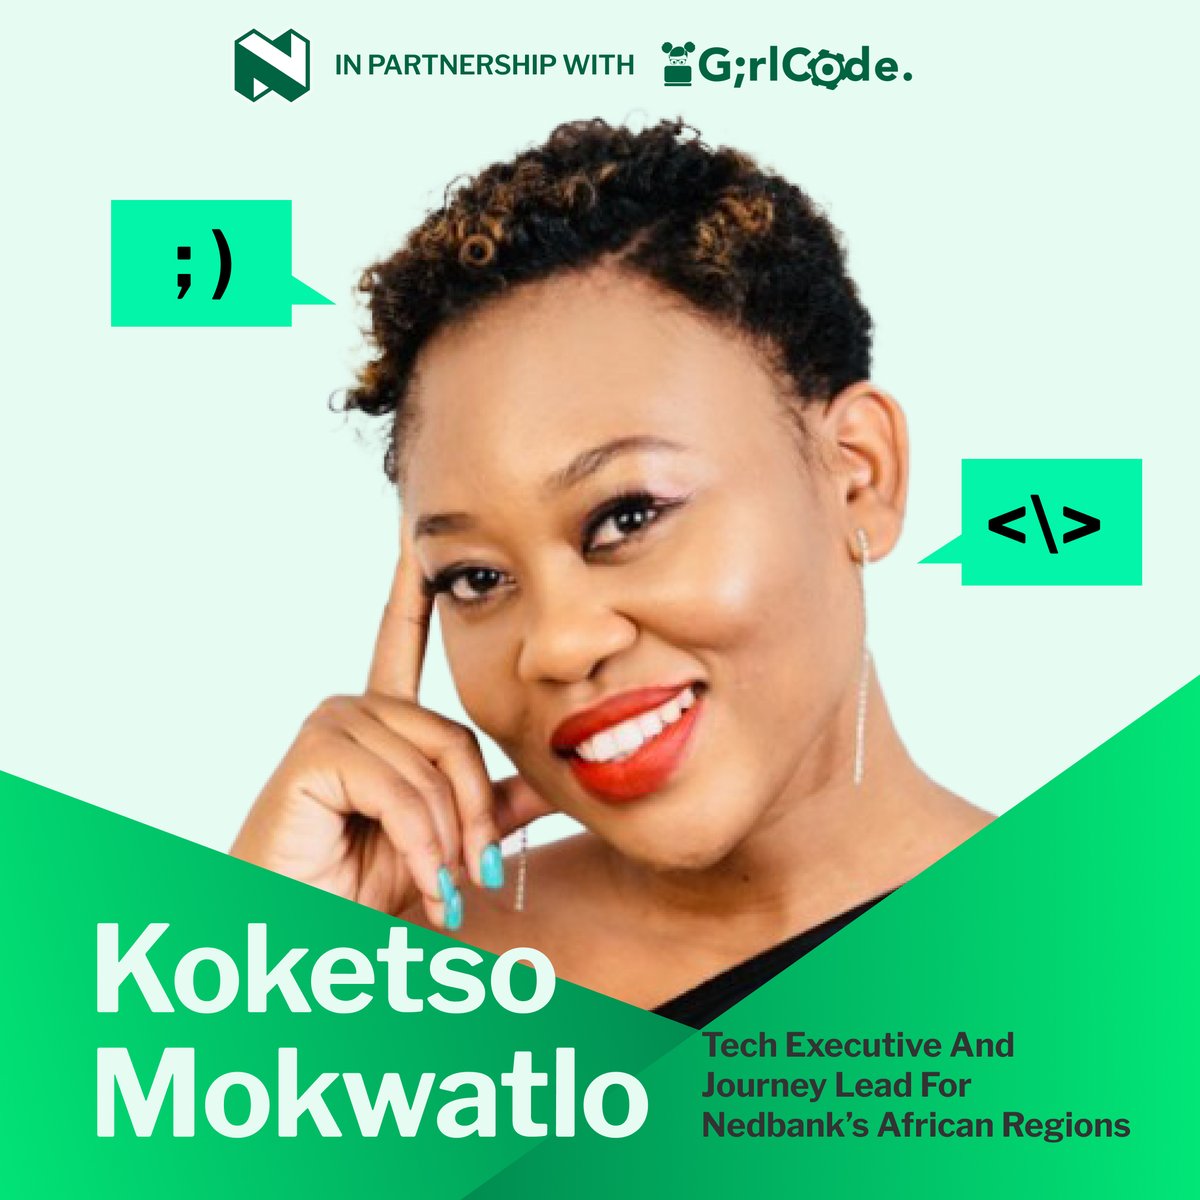 Koketso Mokwatlo is the Tech Executive and Journey Lead for Nedbank’s African Regions. She has extensive knowledge spanning over 16 years specialising in Strategy, Project Management and Technology. She is sharing her journey in IT with our delegates today. #NedbankXGirlCode